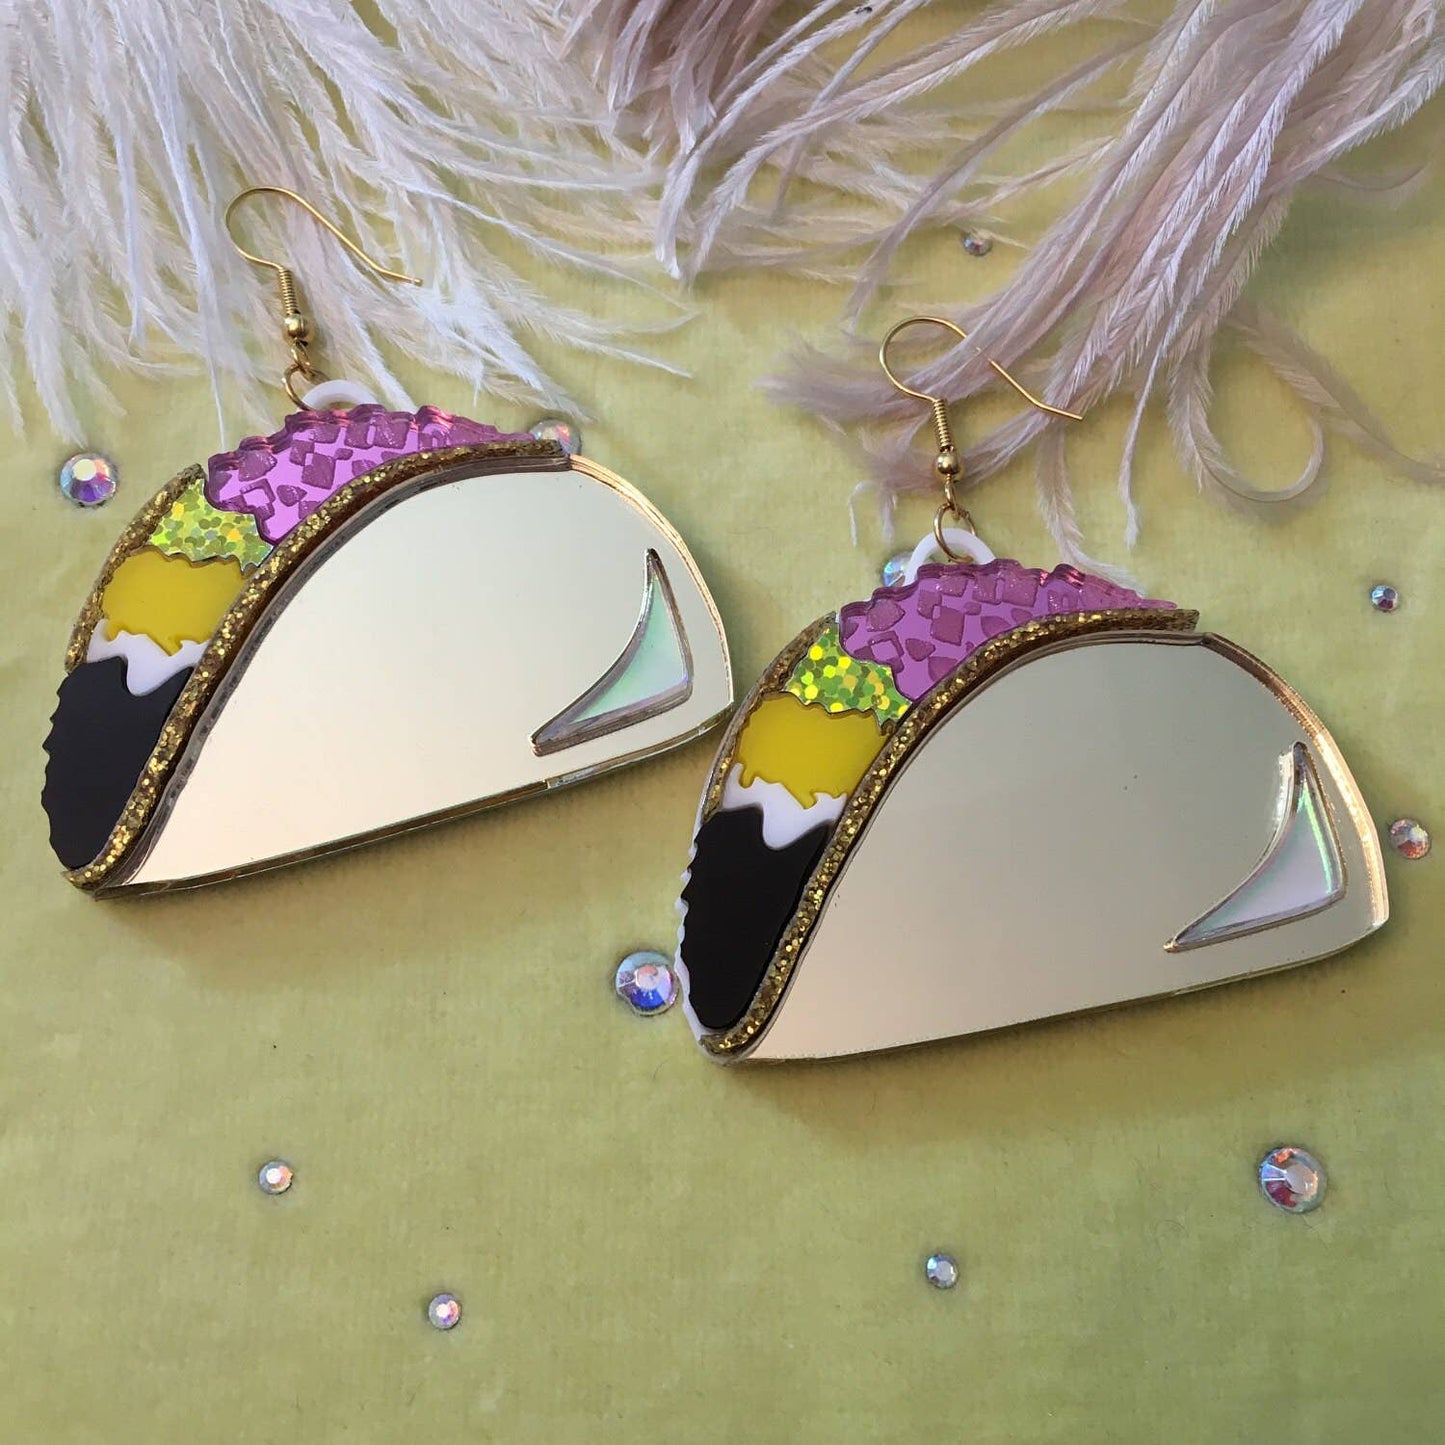 I'm Your Present - Taco Large Food Earrings, Laser Cut Acrylic, Plastic Jewelry